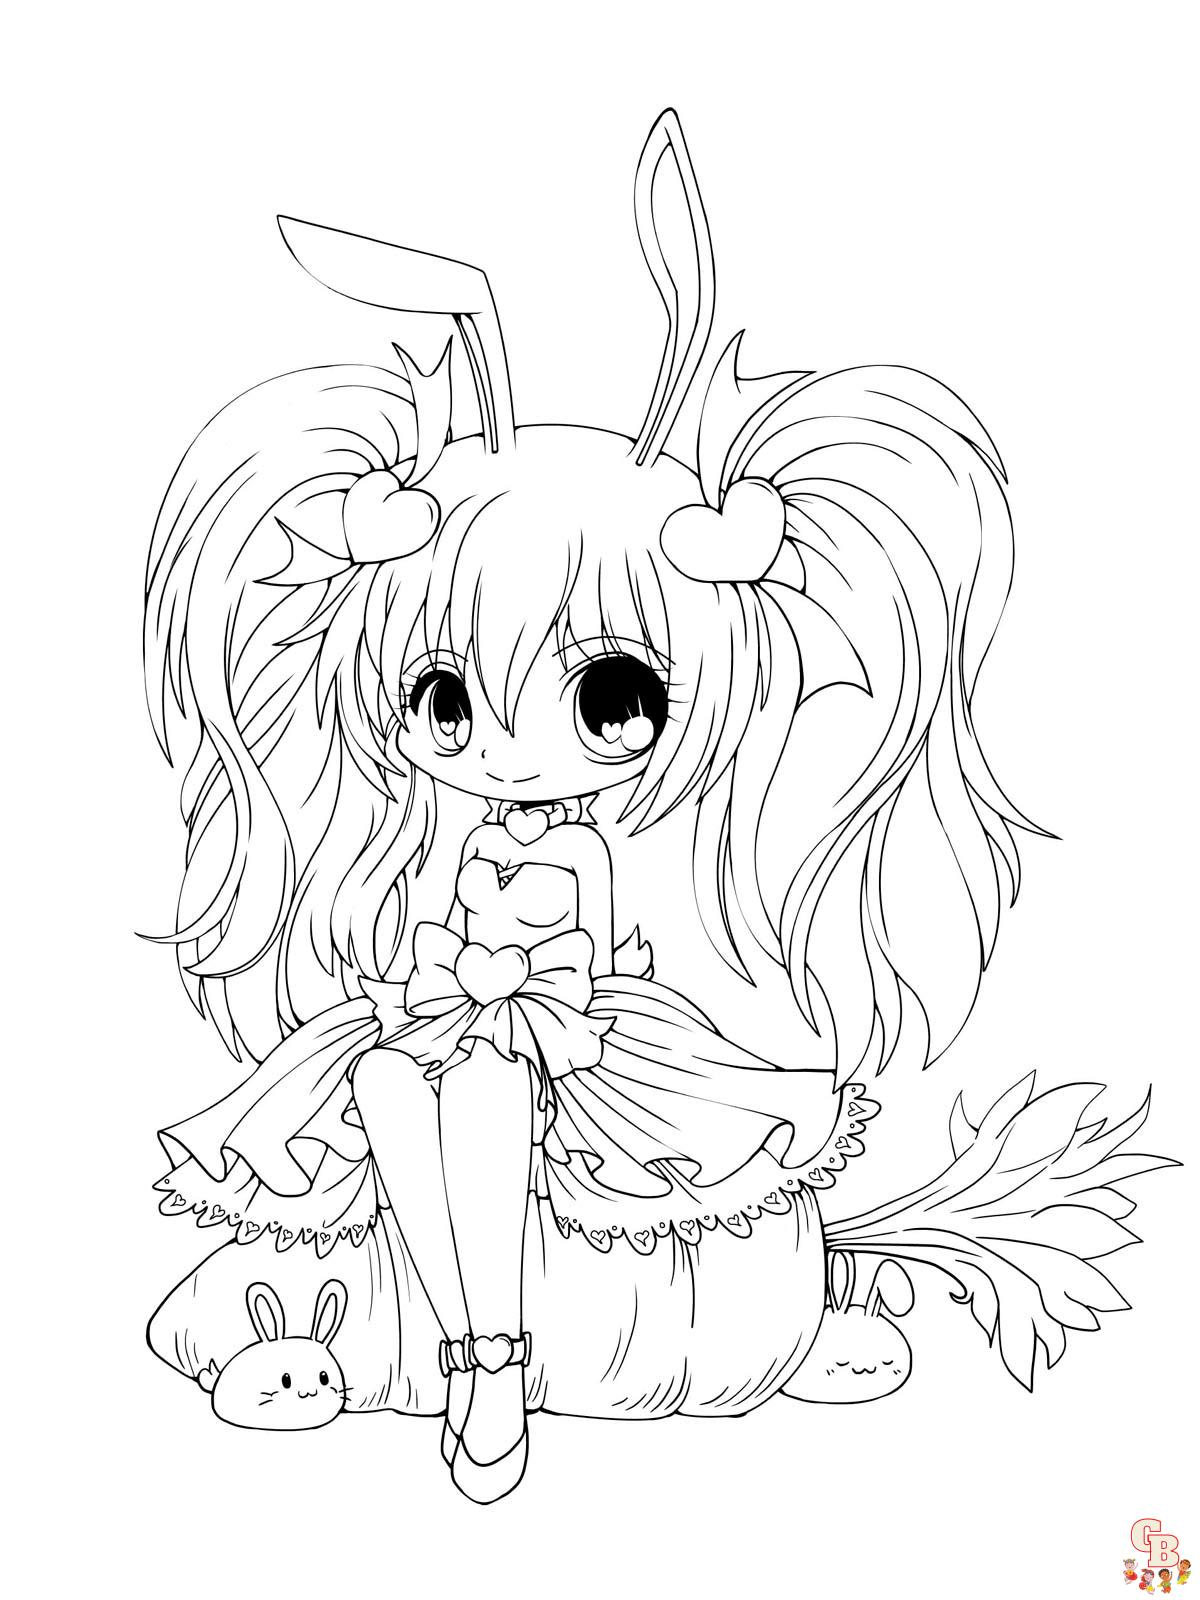 Devil Anime Girls Coloring Pages - ColoringBay